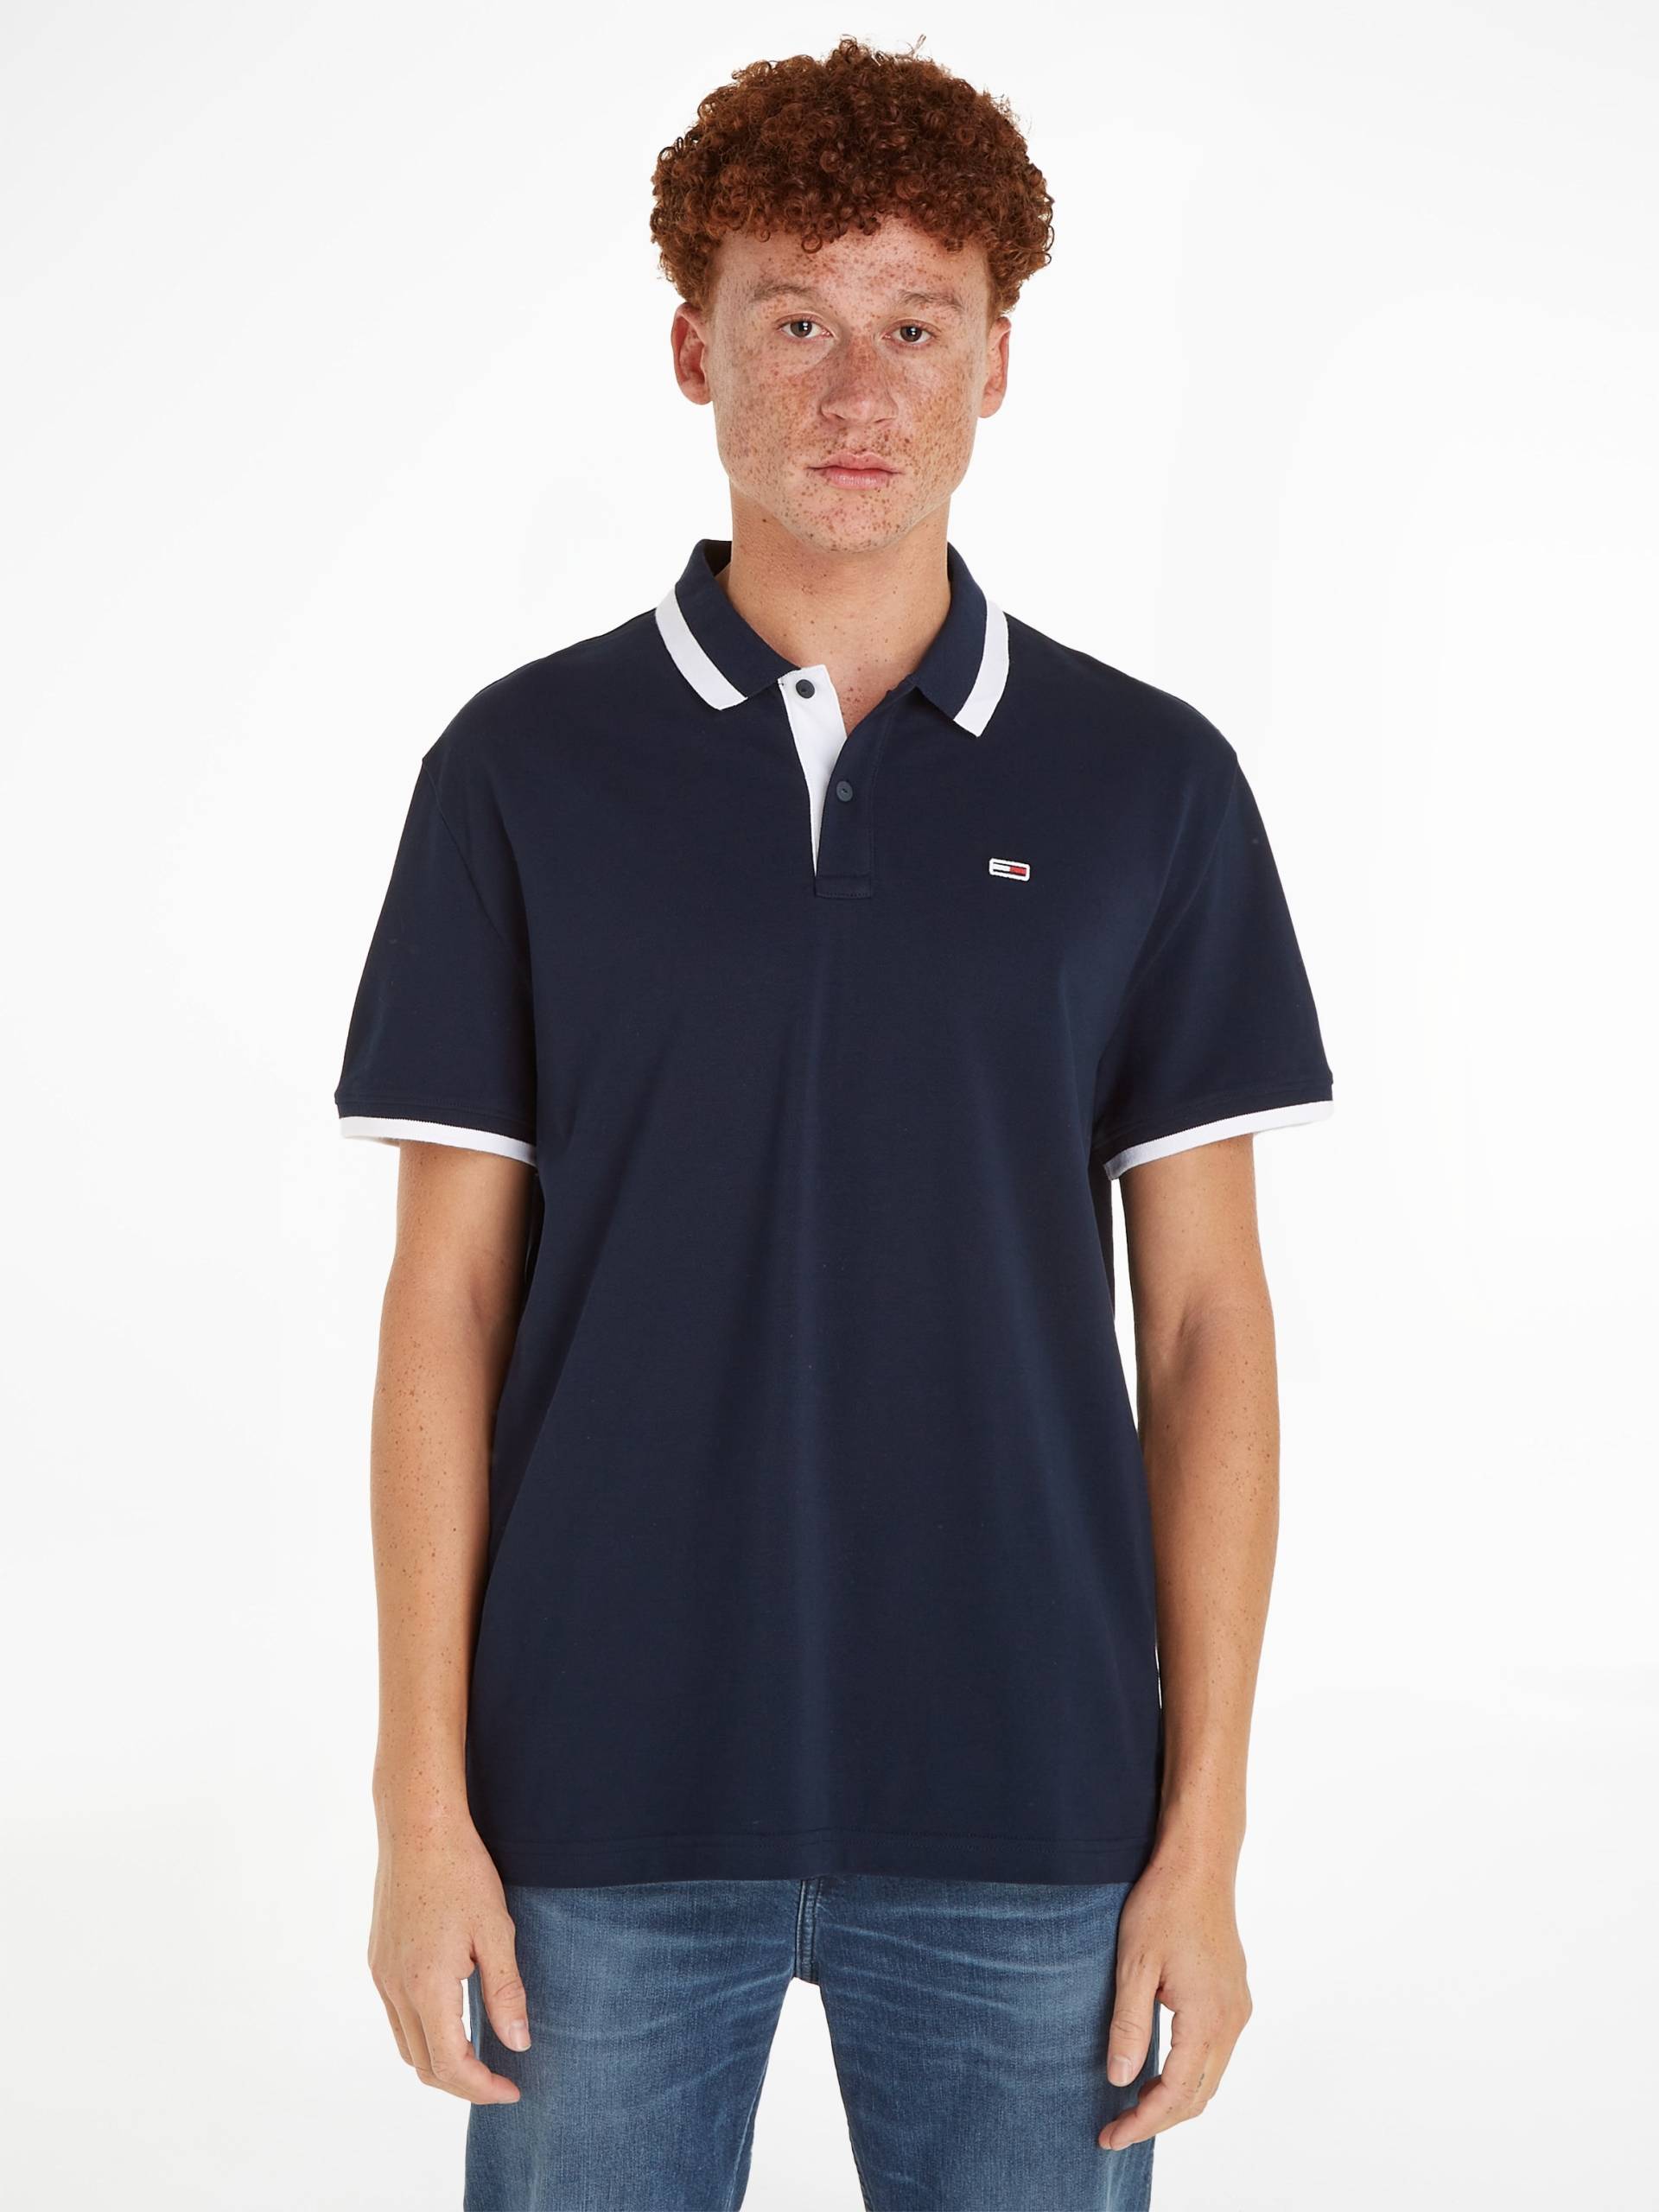 Tommy Jeans Poloshirt »TJM REG SOLID TIPPED POLO«, mit Polokragen von Tommy Jeans